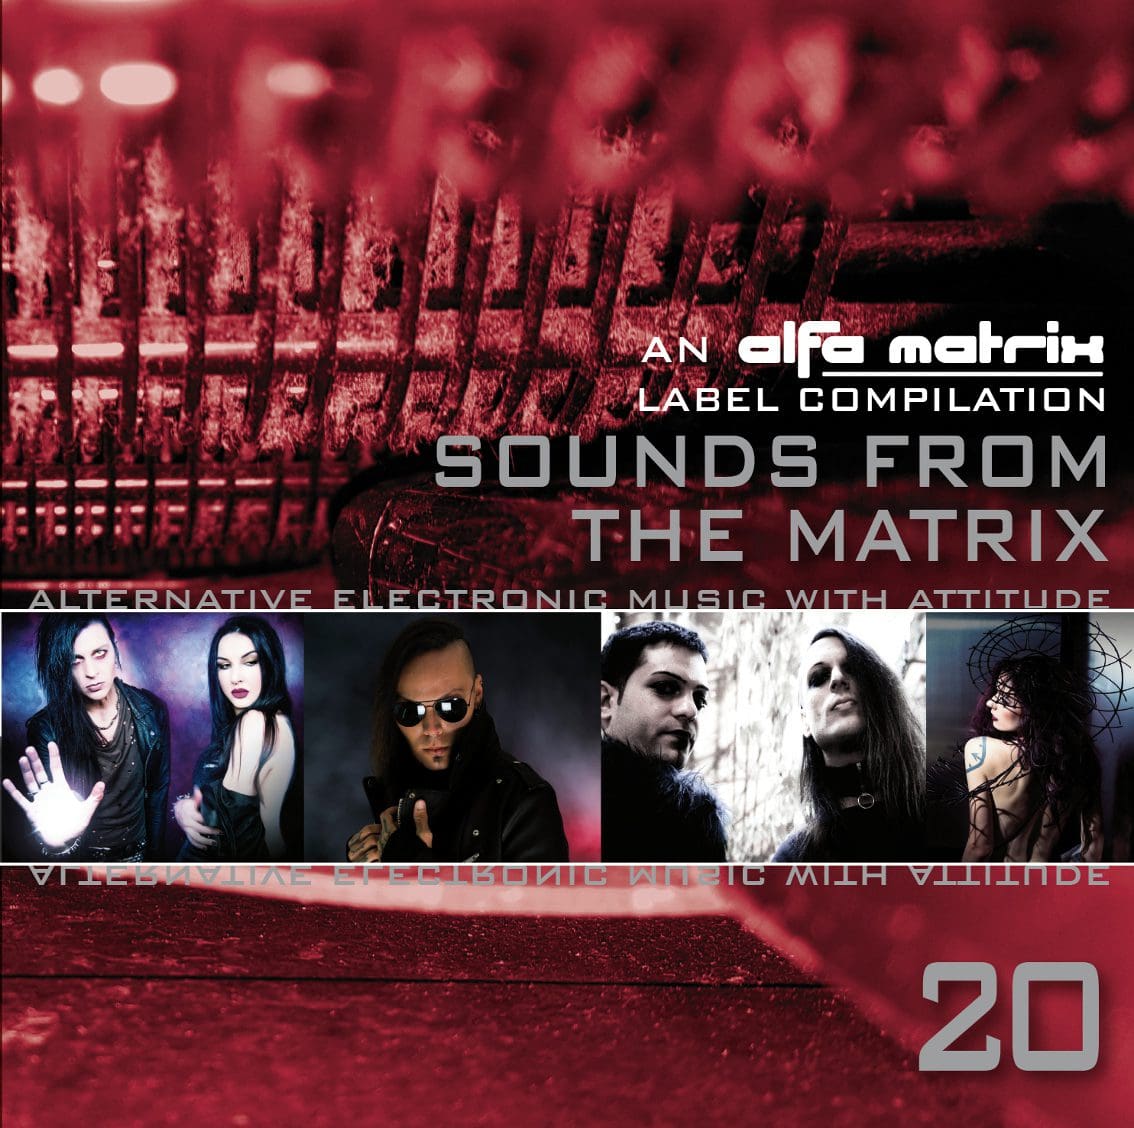 Alfa Matrix releases 'Sounds From The Matrix 20' on Bandcamp as well